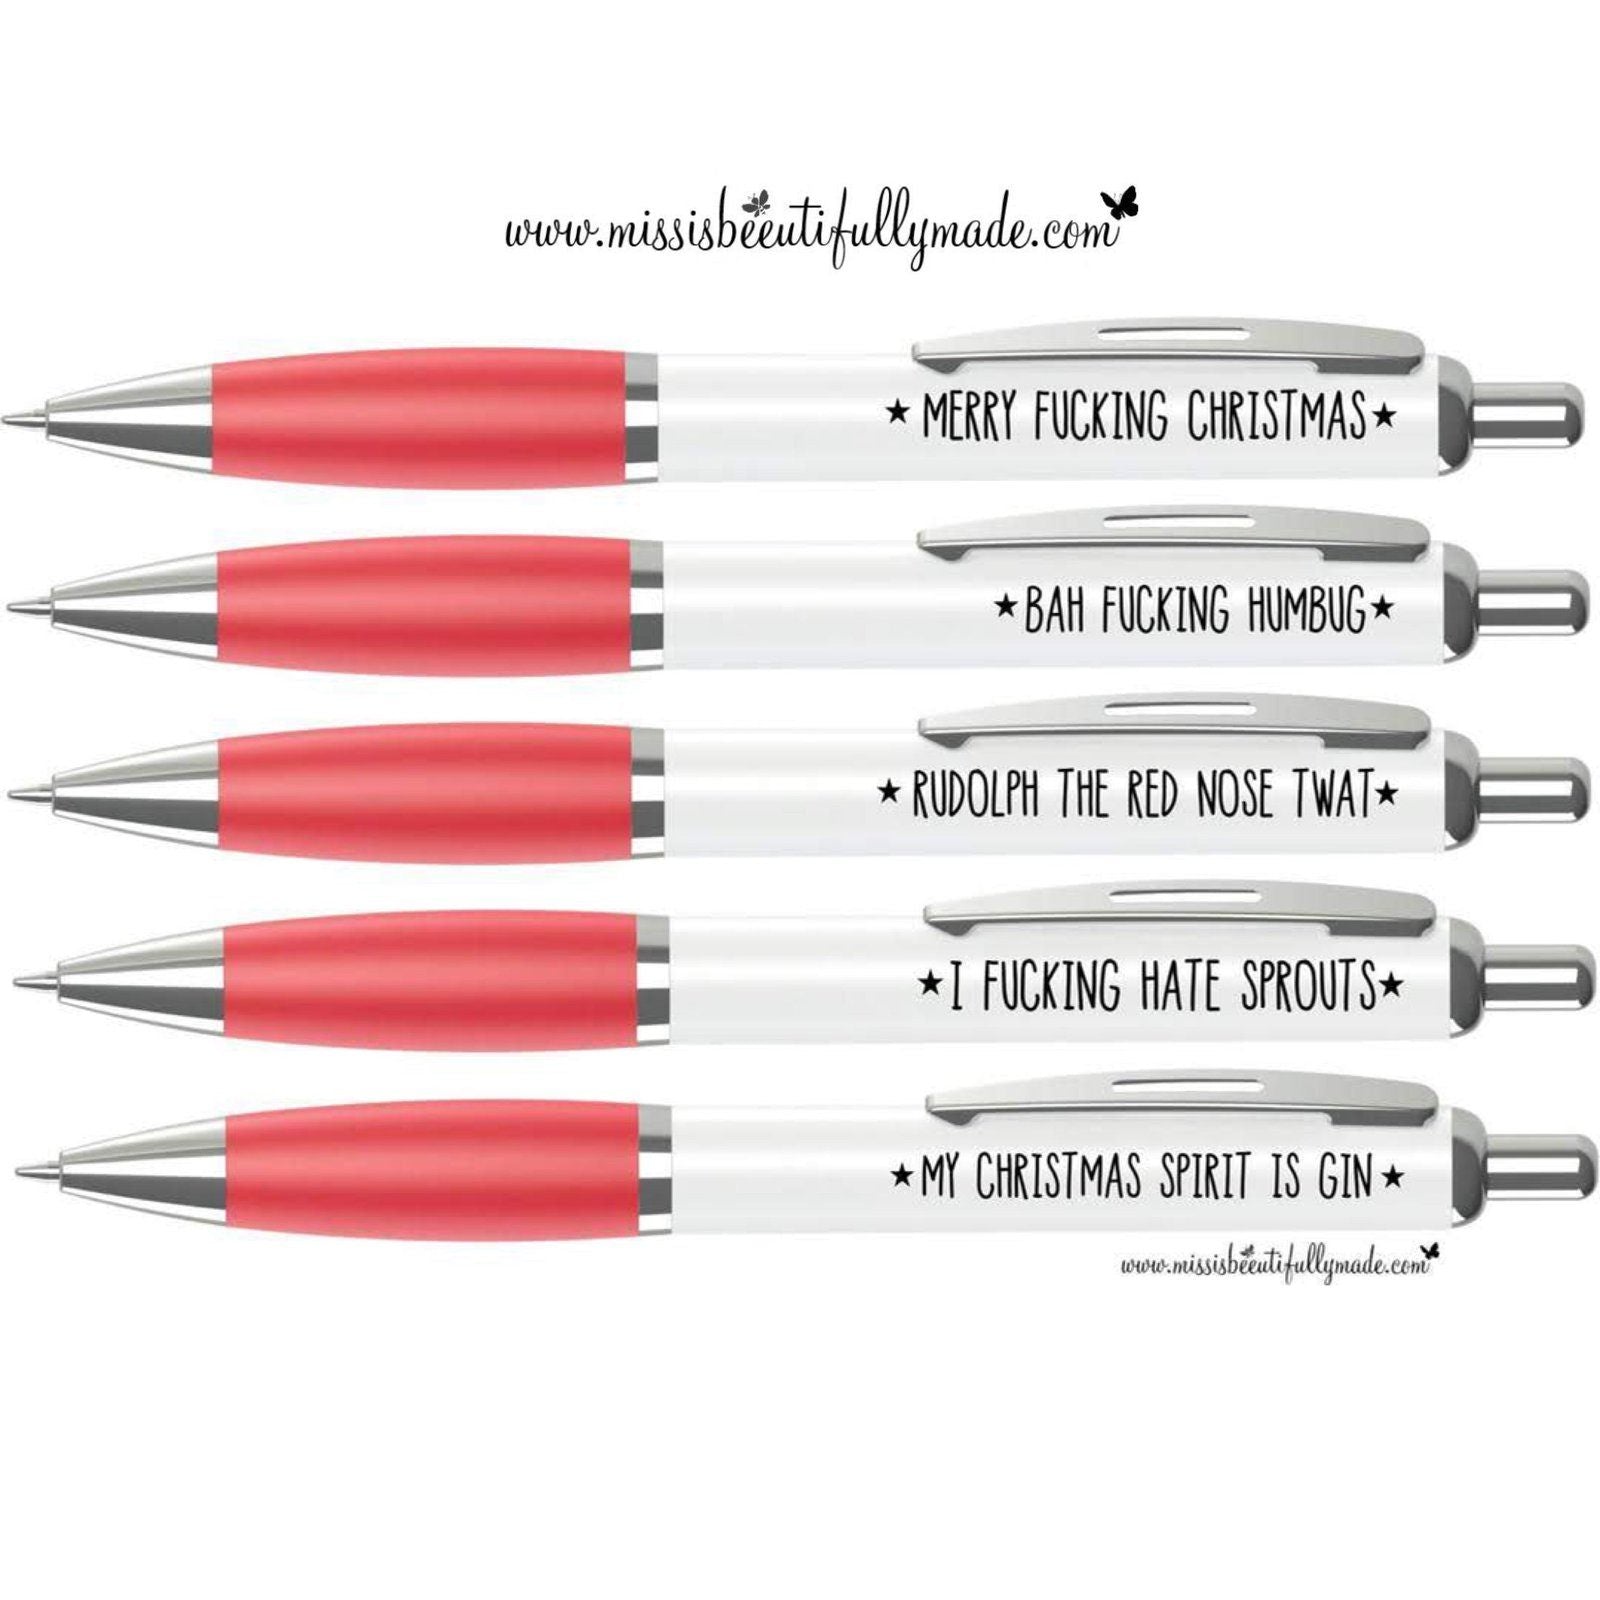 Funny Cheeky Novelty Rude Sweary Profanity Ballpoint Pen Great for Birthday  Christmas or Great for Work CHEAP FUNNY GIFT 